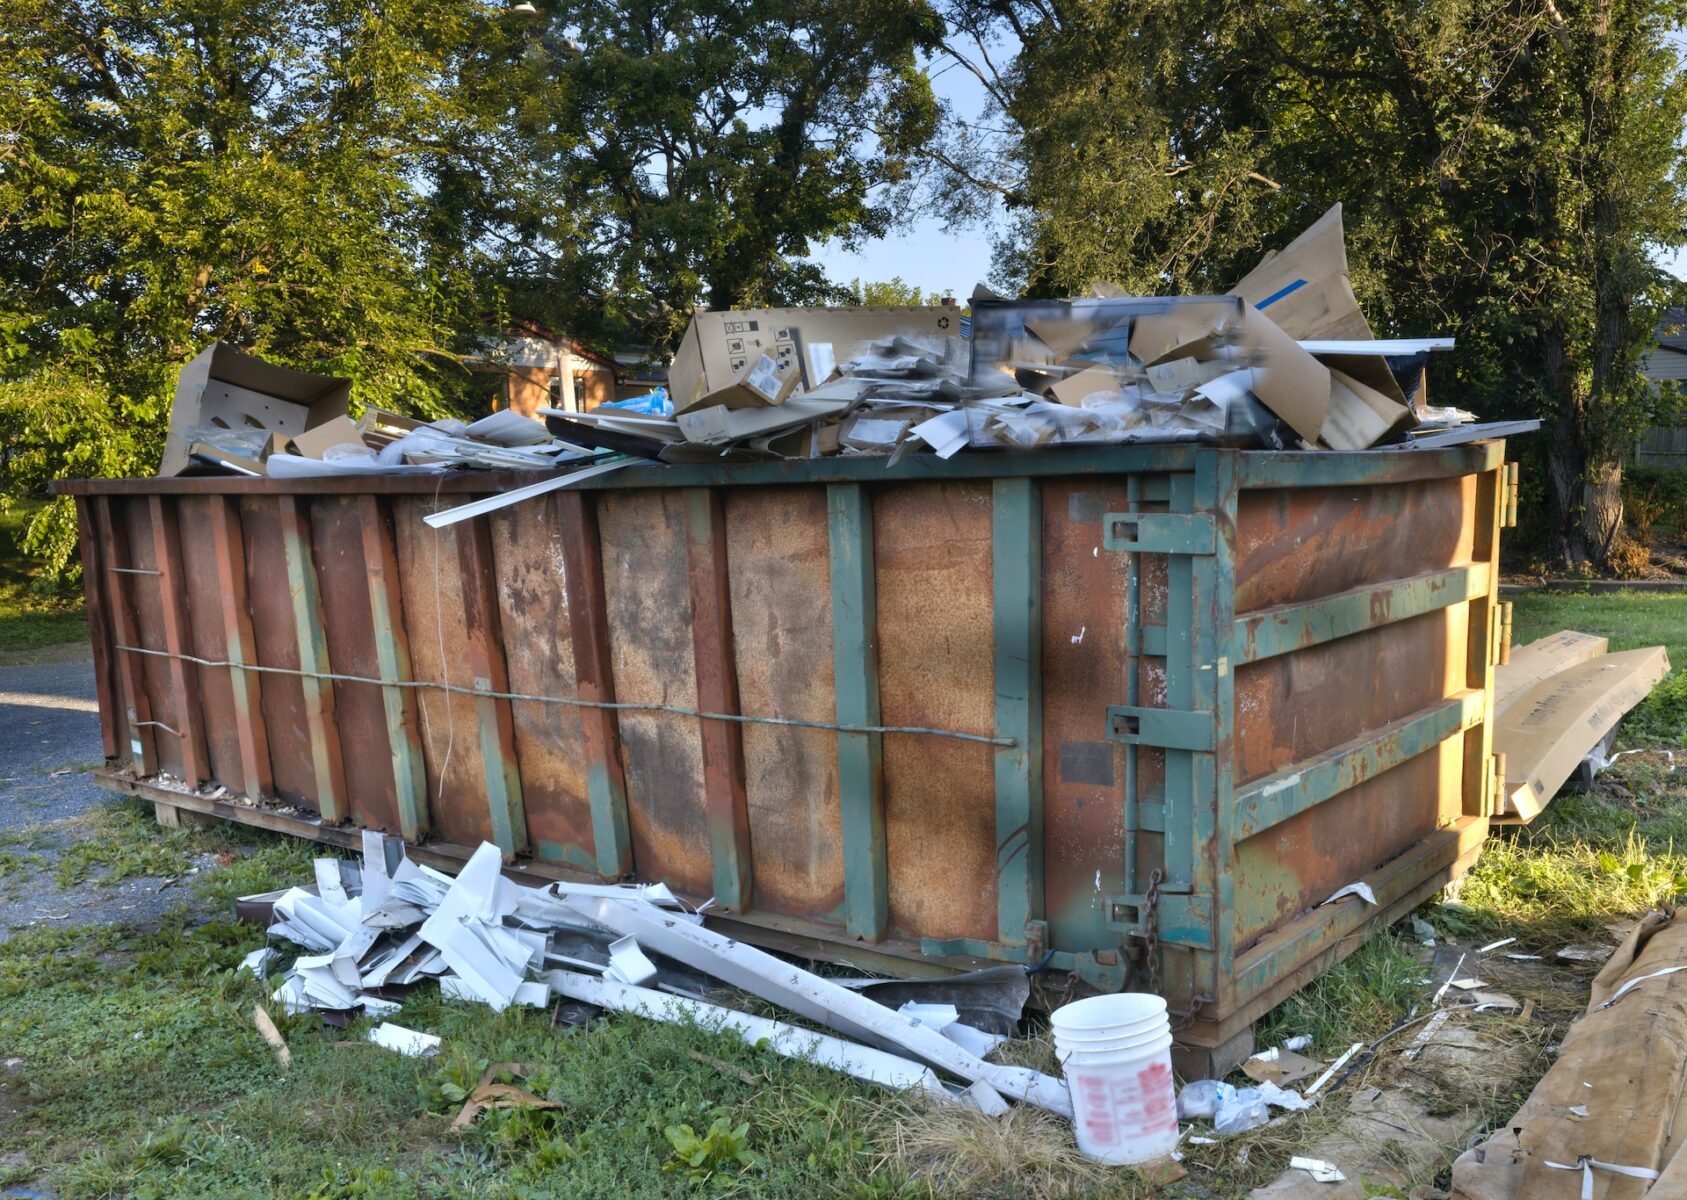 Here’s What You Need To Know About Dumpster Rentals